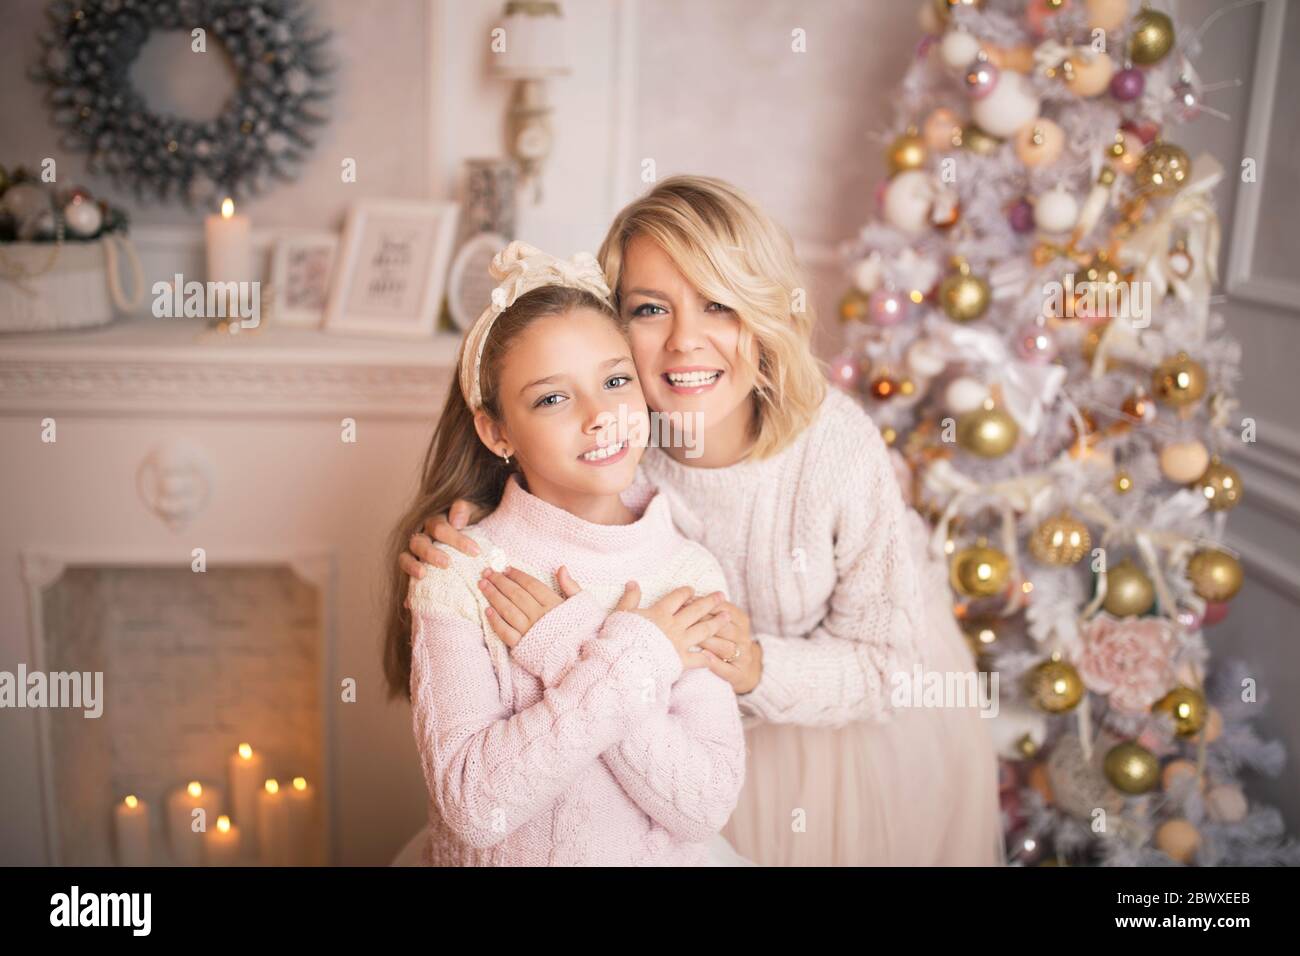 Portrait of a joyful mom and daughter against the background of the Christmas interior. Stock Photo